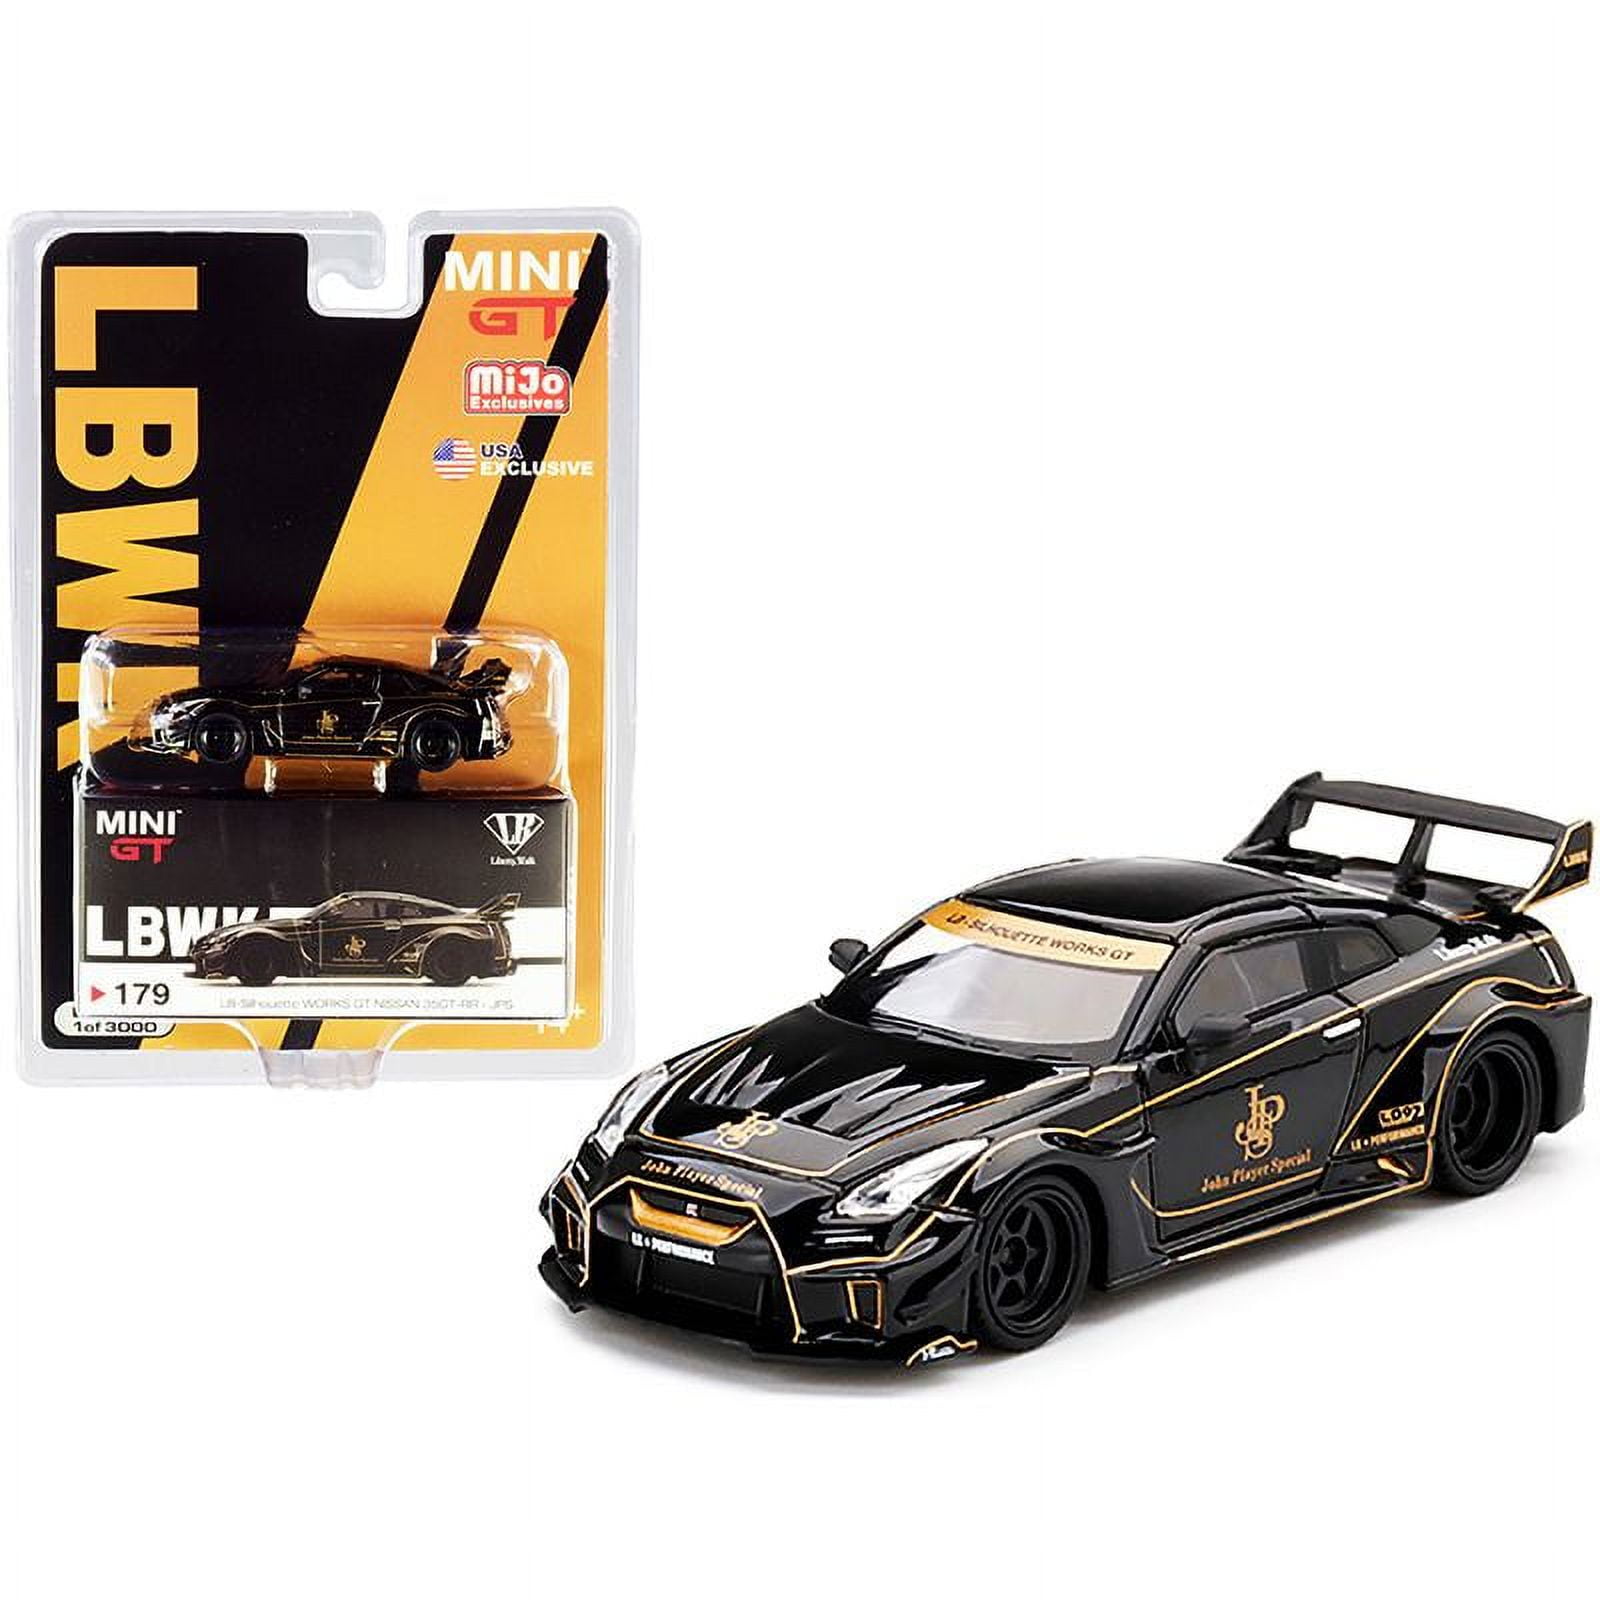 Nissan 35GT-RR Ver. 1 LB-Silhouette WORKS GT Black with Gold Stripes JPS  (John Players Special) Limited Edition to 3000 pieces Worldwide 1/64  Diecast 